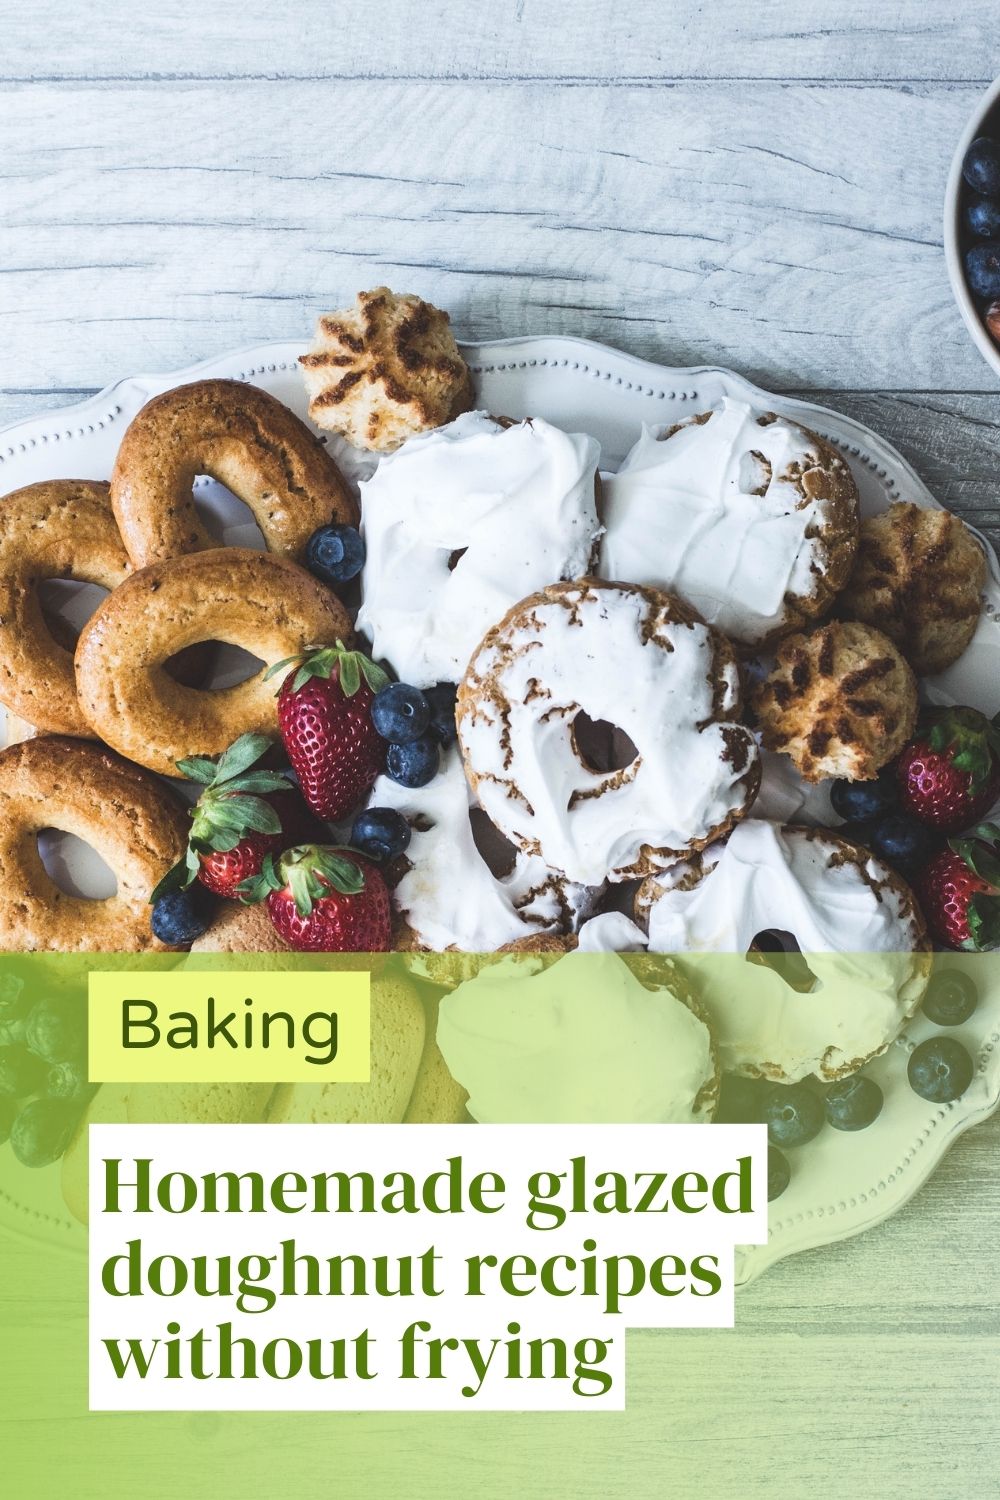 Homemade glazed doughnut recipes without frying